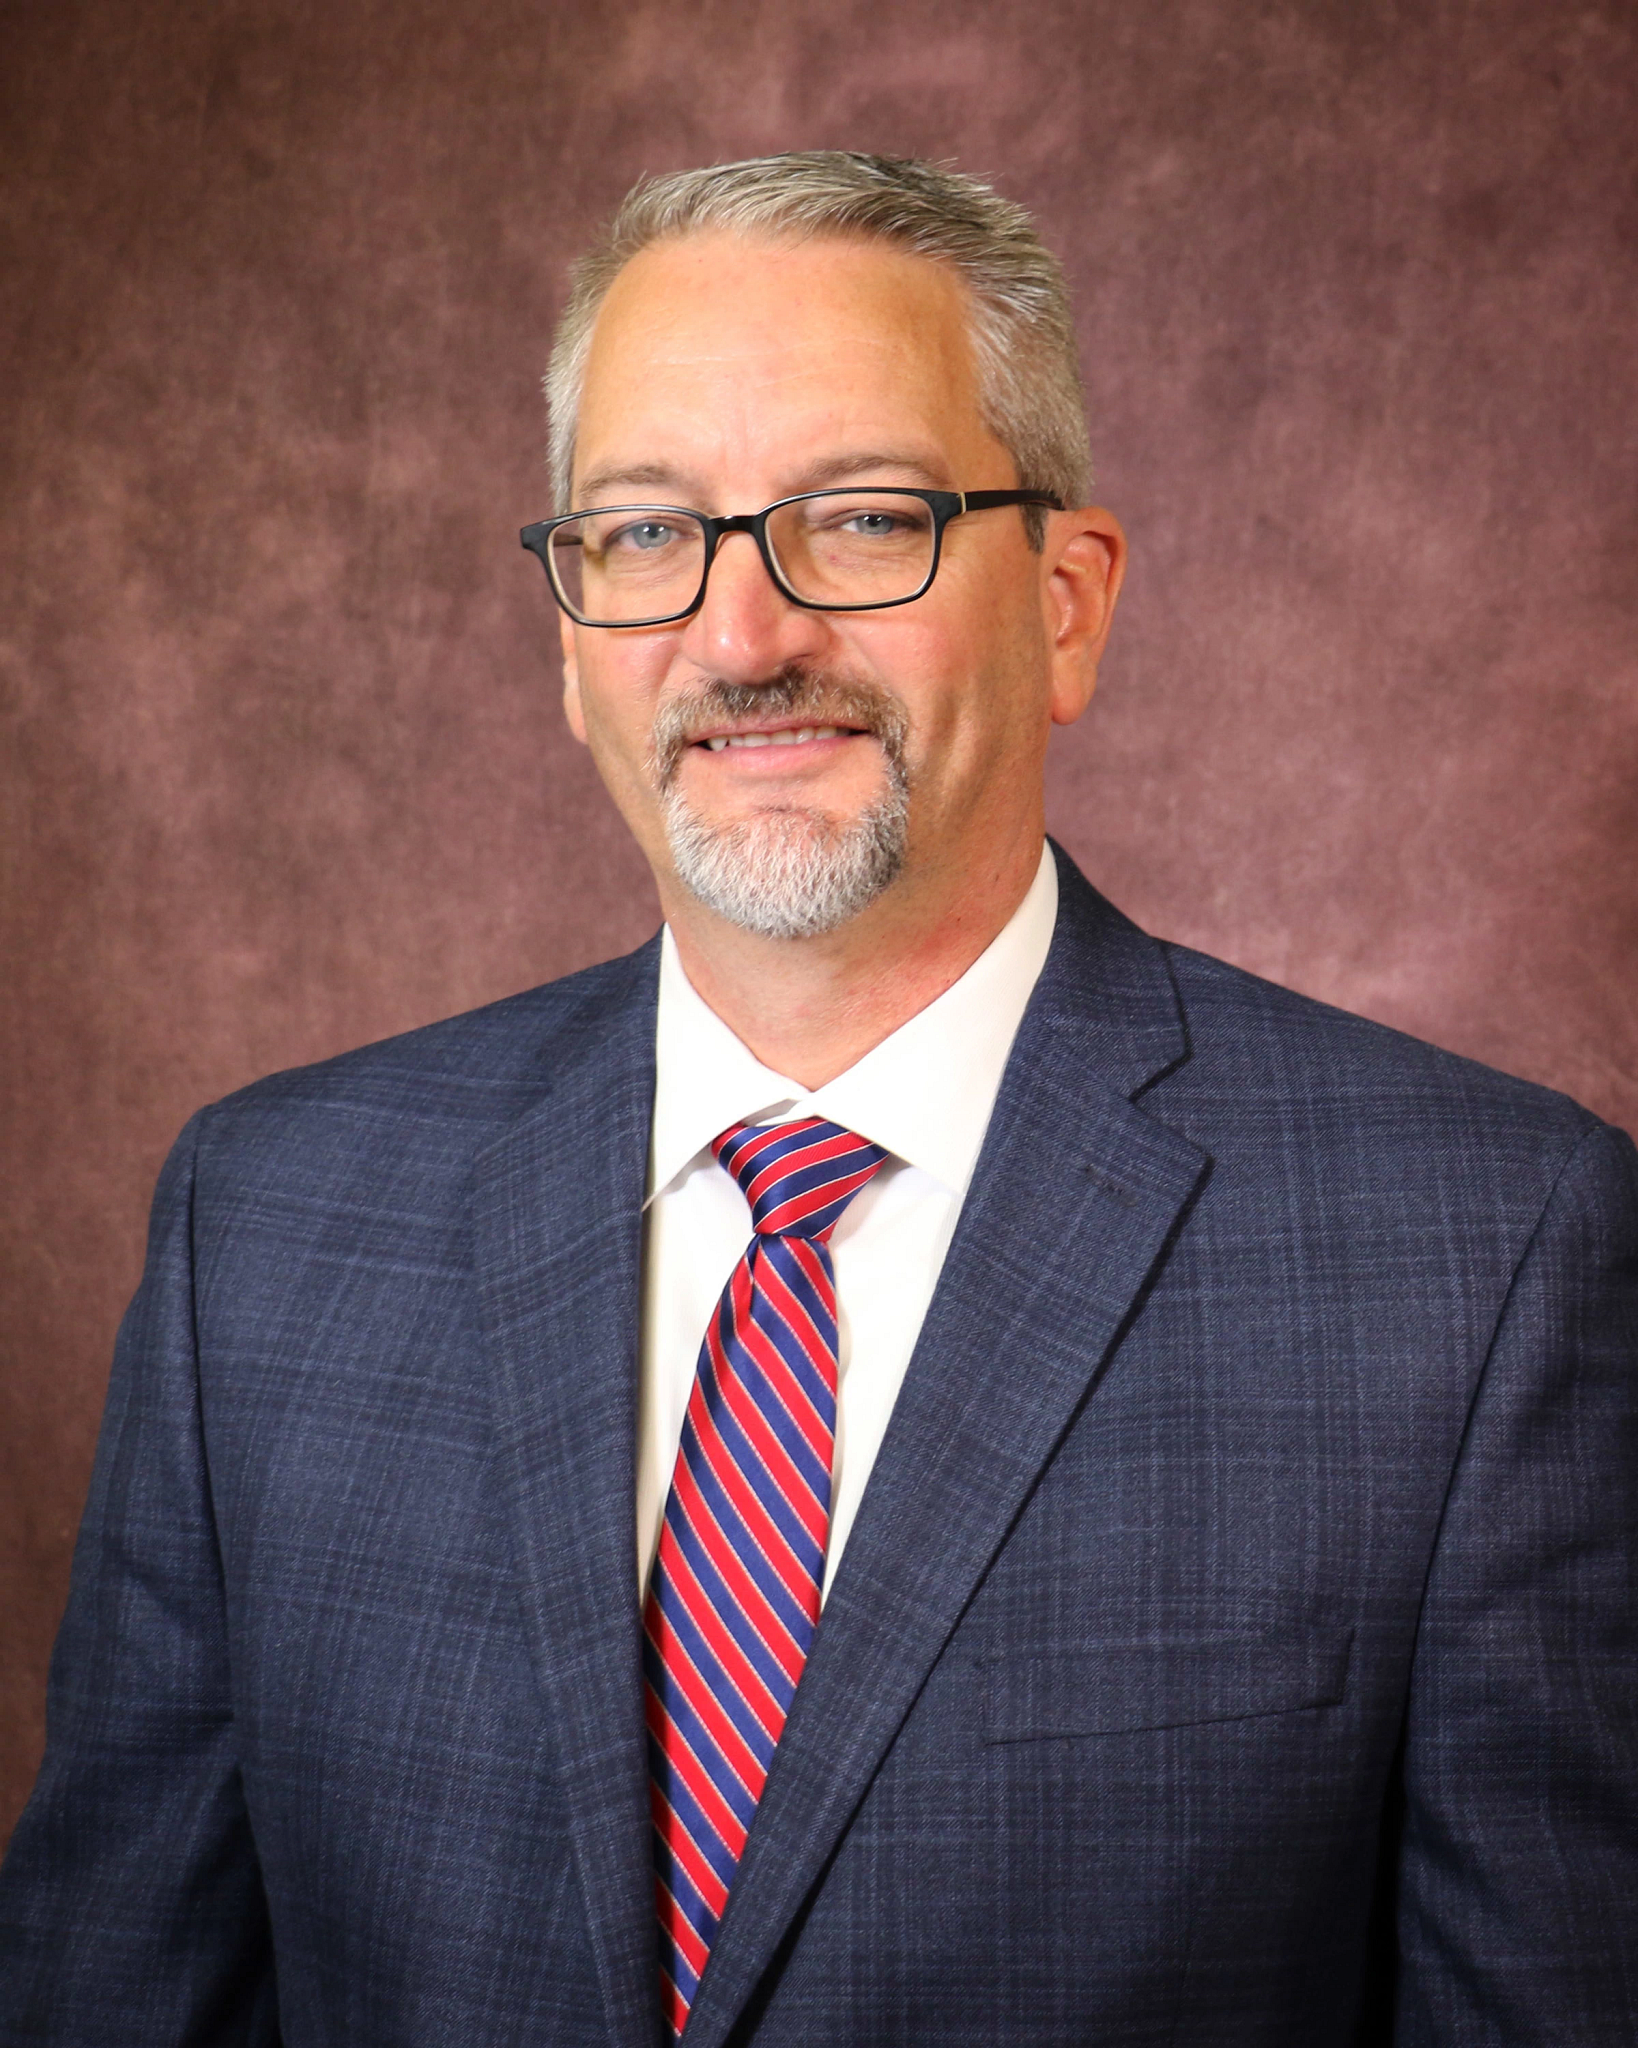 Headshot of David Boyd, Chief Financial Officer and director of Mecklenburg County Financial Services.